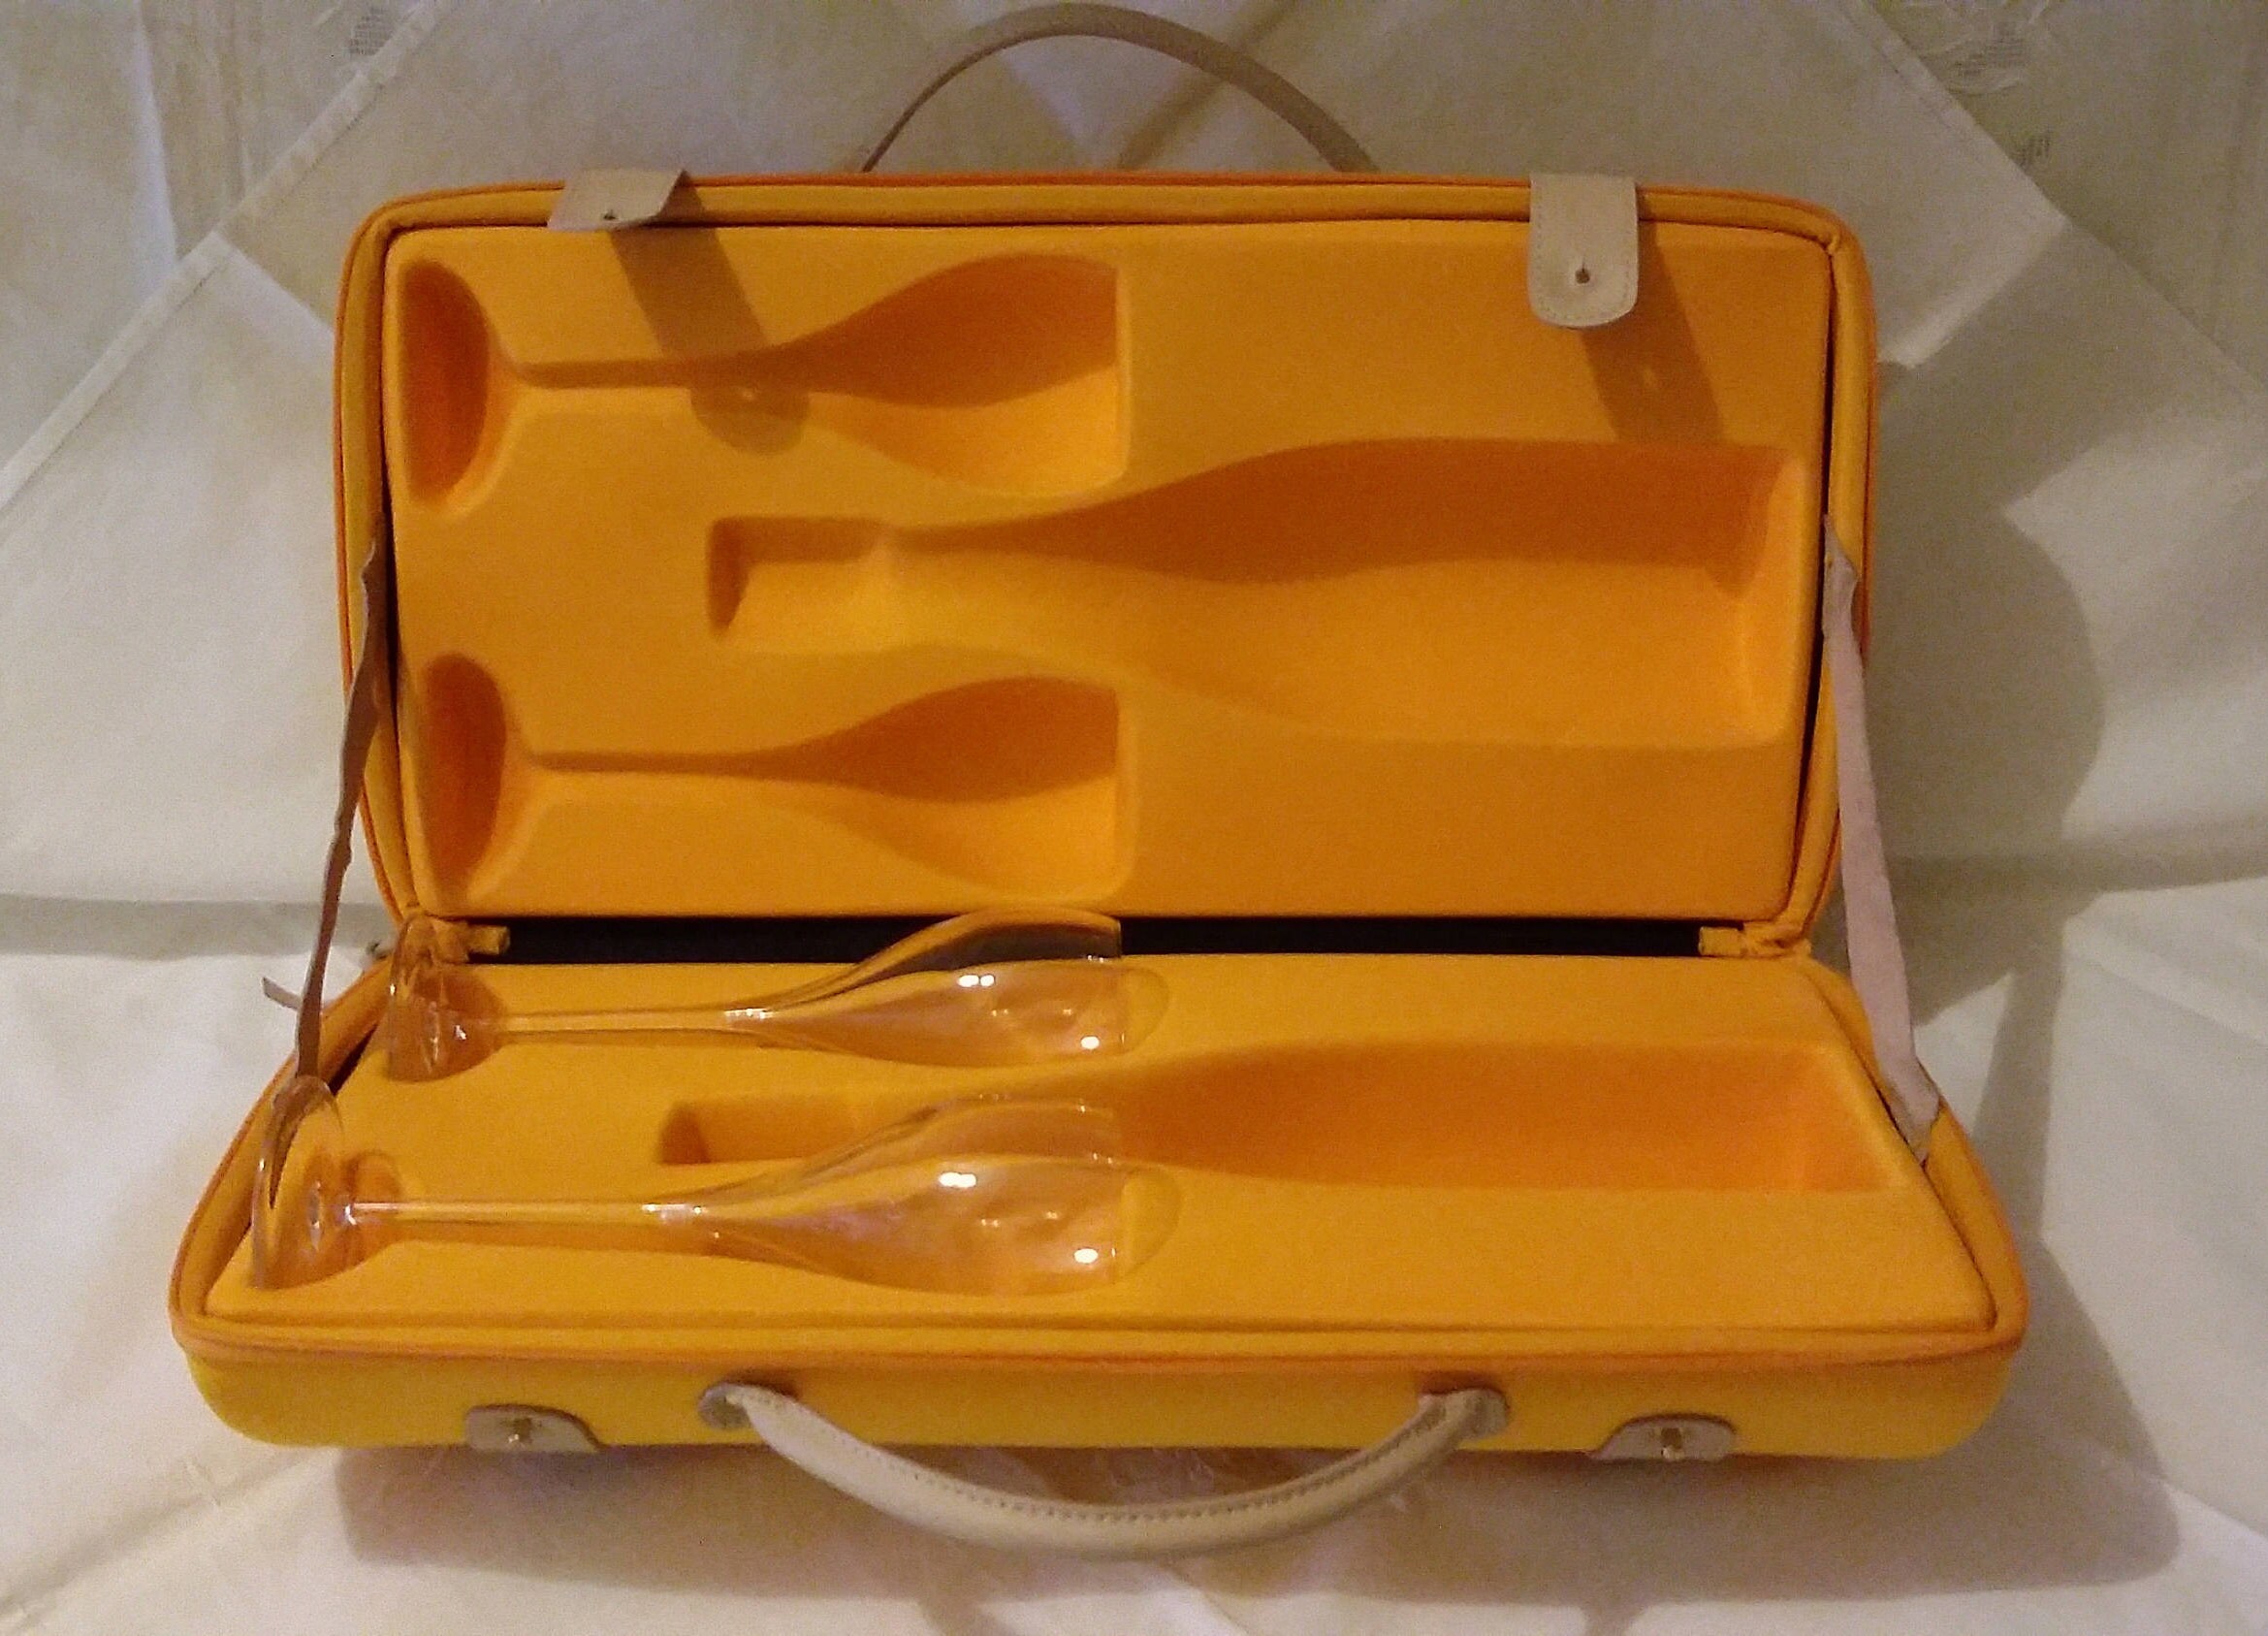 Bag bag produced by Louis Vuitton for champagne Veuve Clicquot Ponsardin  Reims France complete with glass goblets.